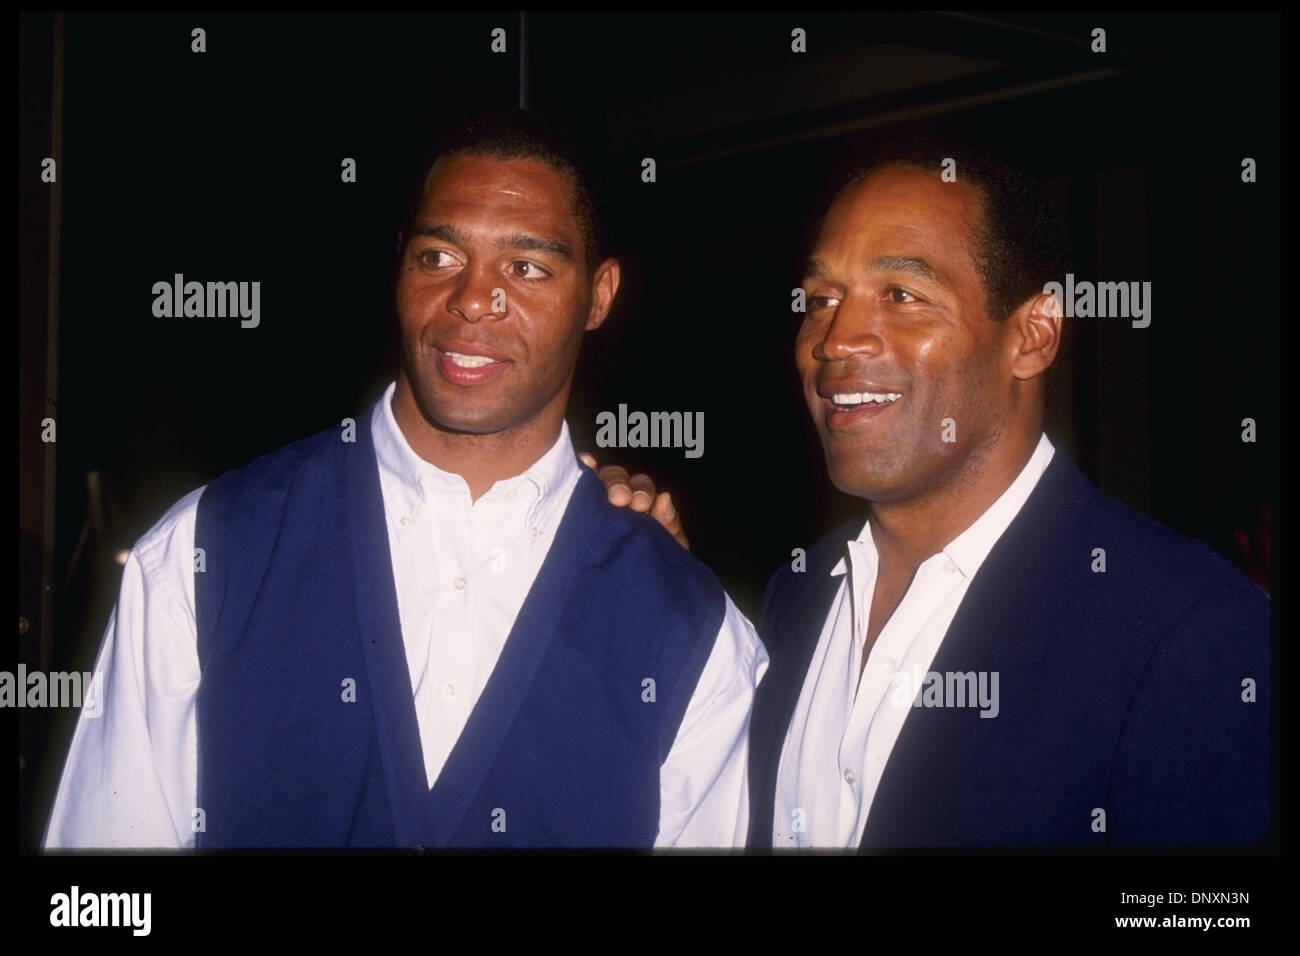 Hollywood, CA, USA;  O.J. SIMPSON and MARCUS ALLEN attend the Frank Sinatra Golf event held in Palm Springs, CA in an undated photo.  (Michelson - Hutchins/date unknown) Mandatory Credit: Photo by Michelson/ZUMA Press. (©) Copyright 2006 Michelson Stock Photo